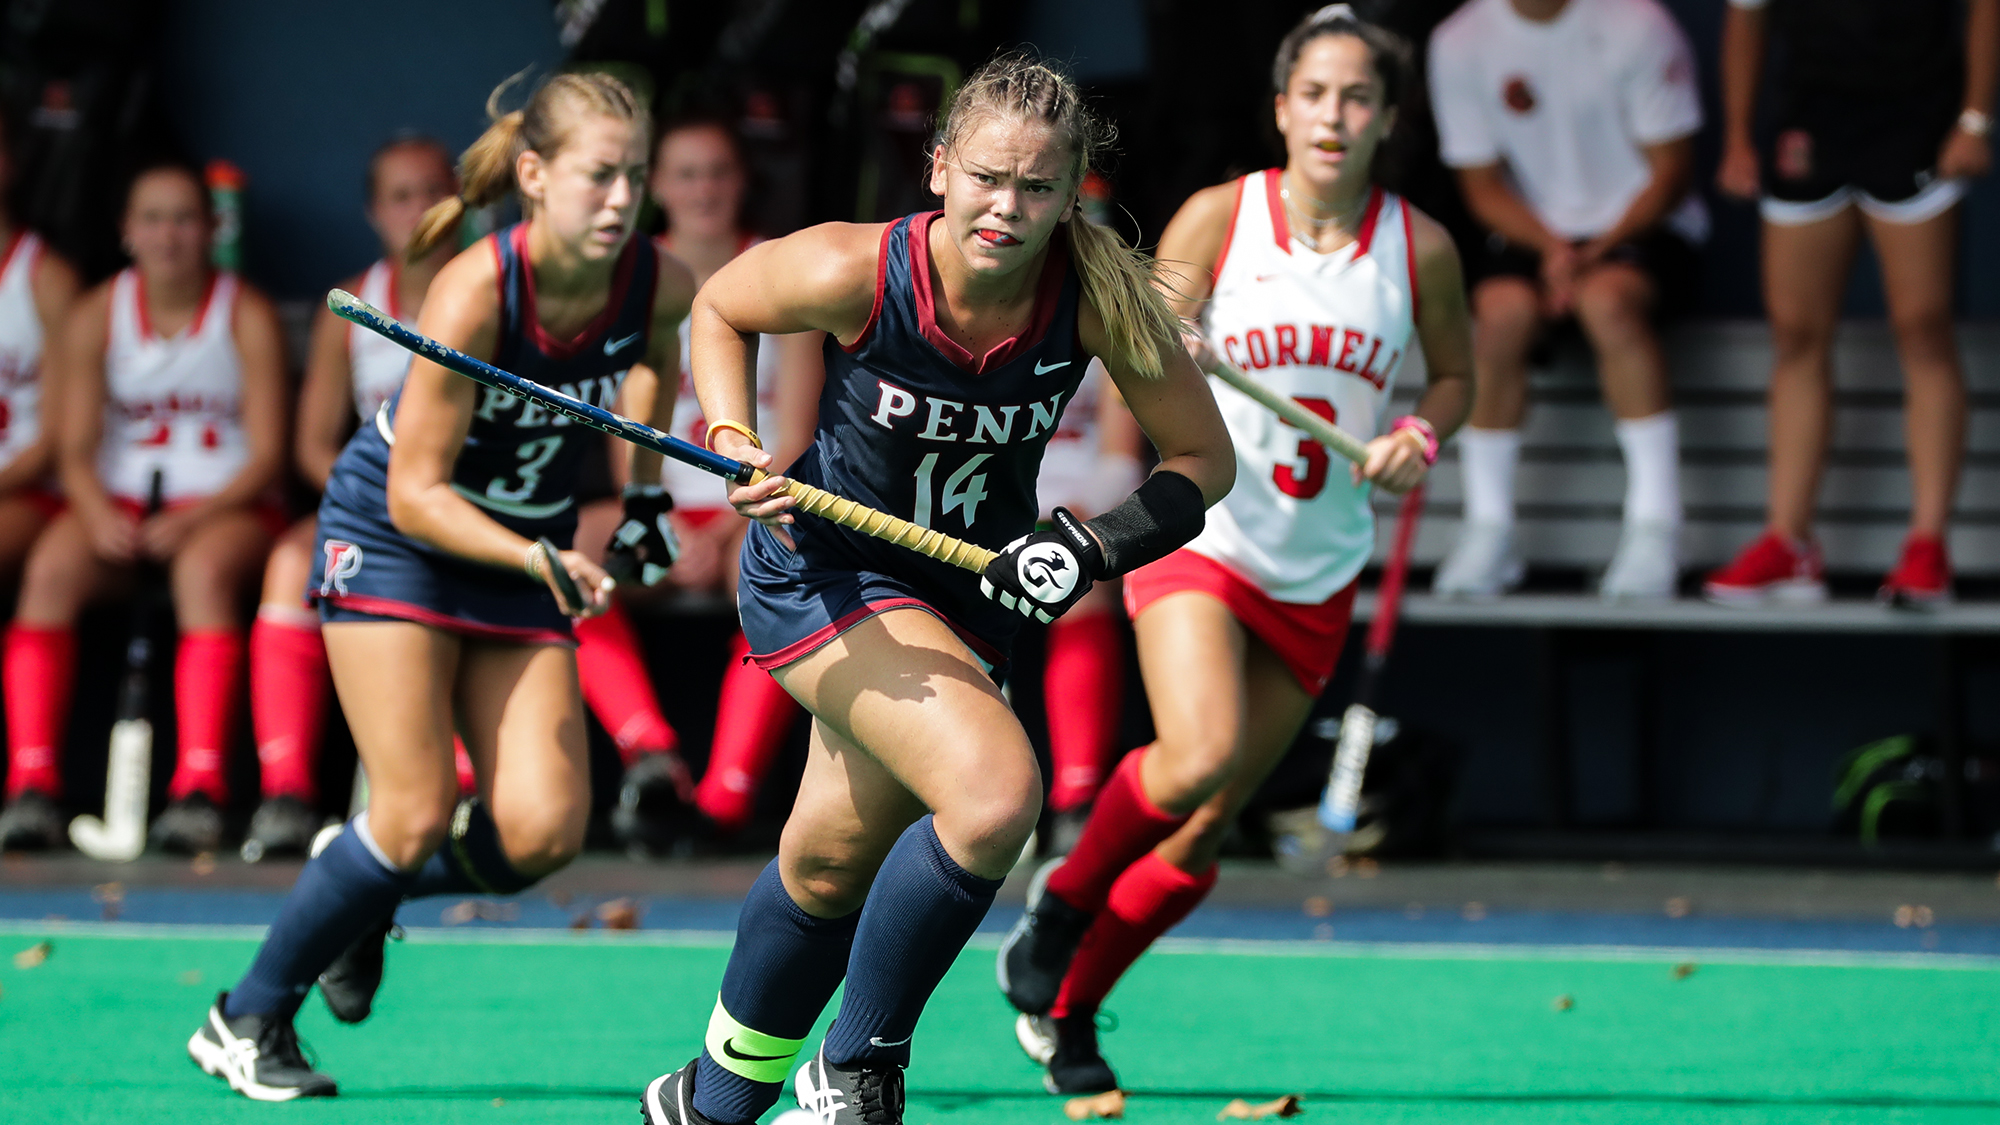 During a game against Cornell, Alexa Schneck runs down the field with her stick in her hand.